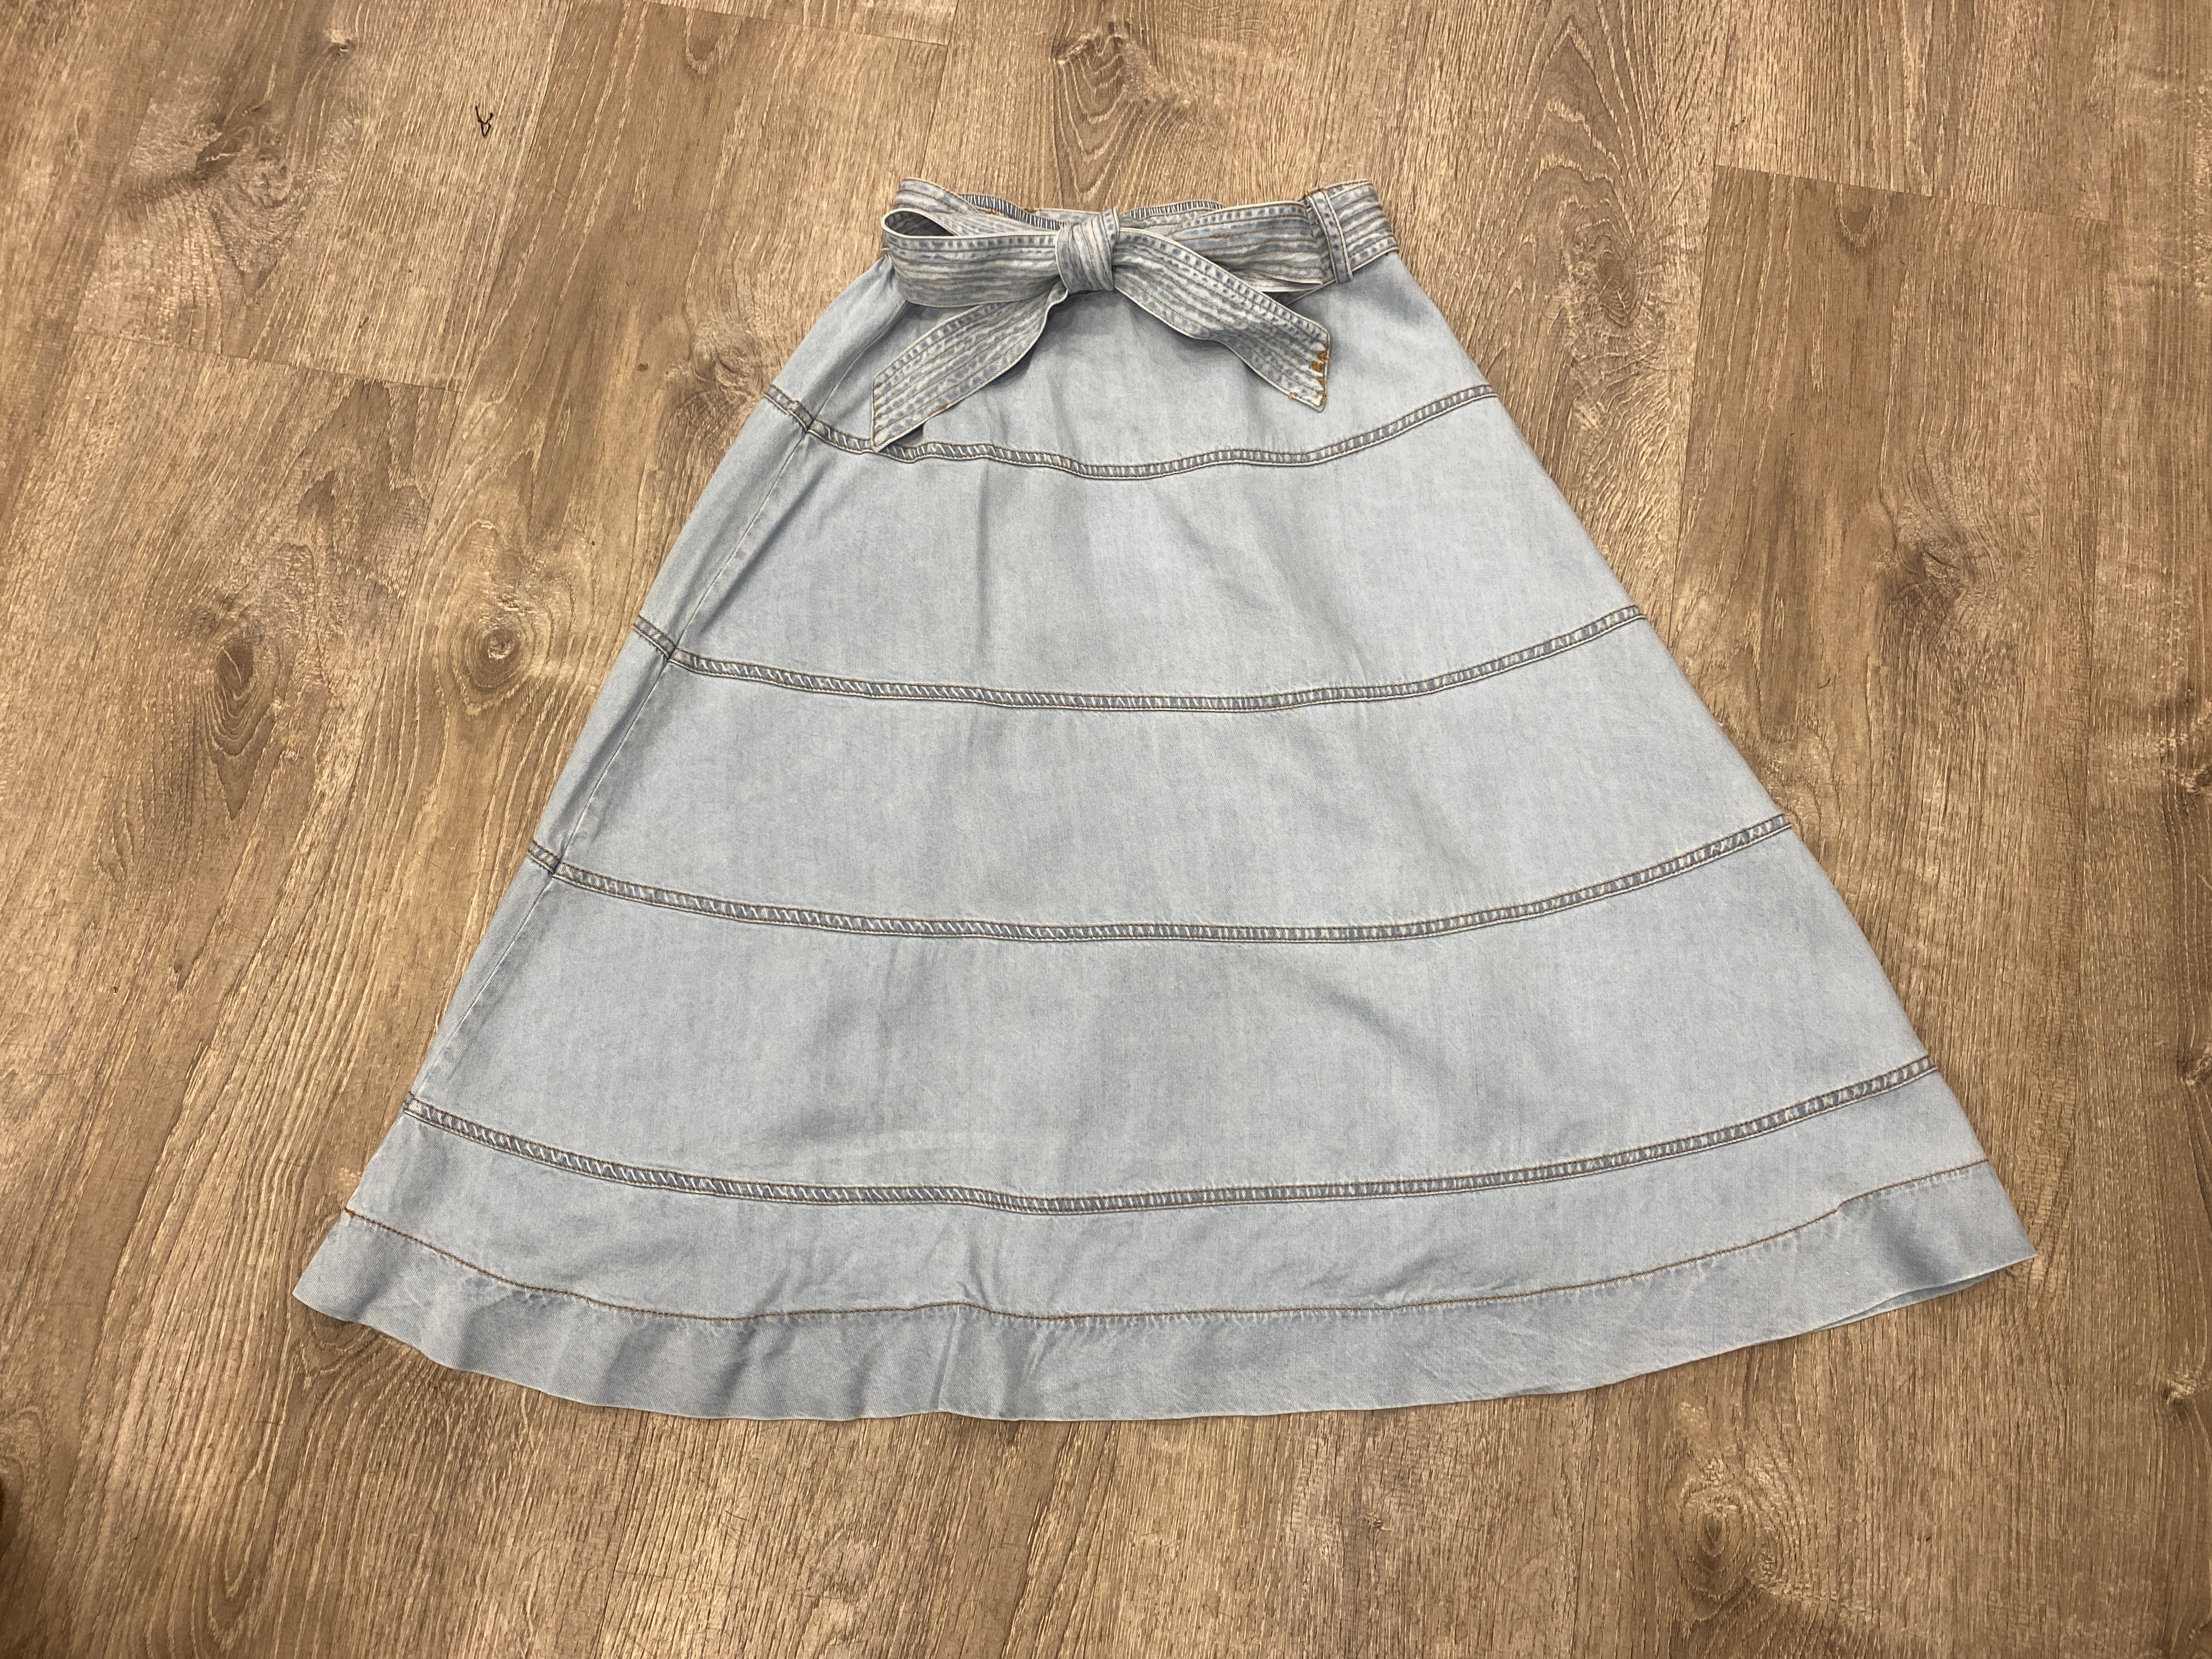 THE BOW TIE SKIRT